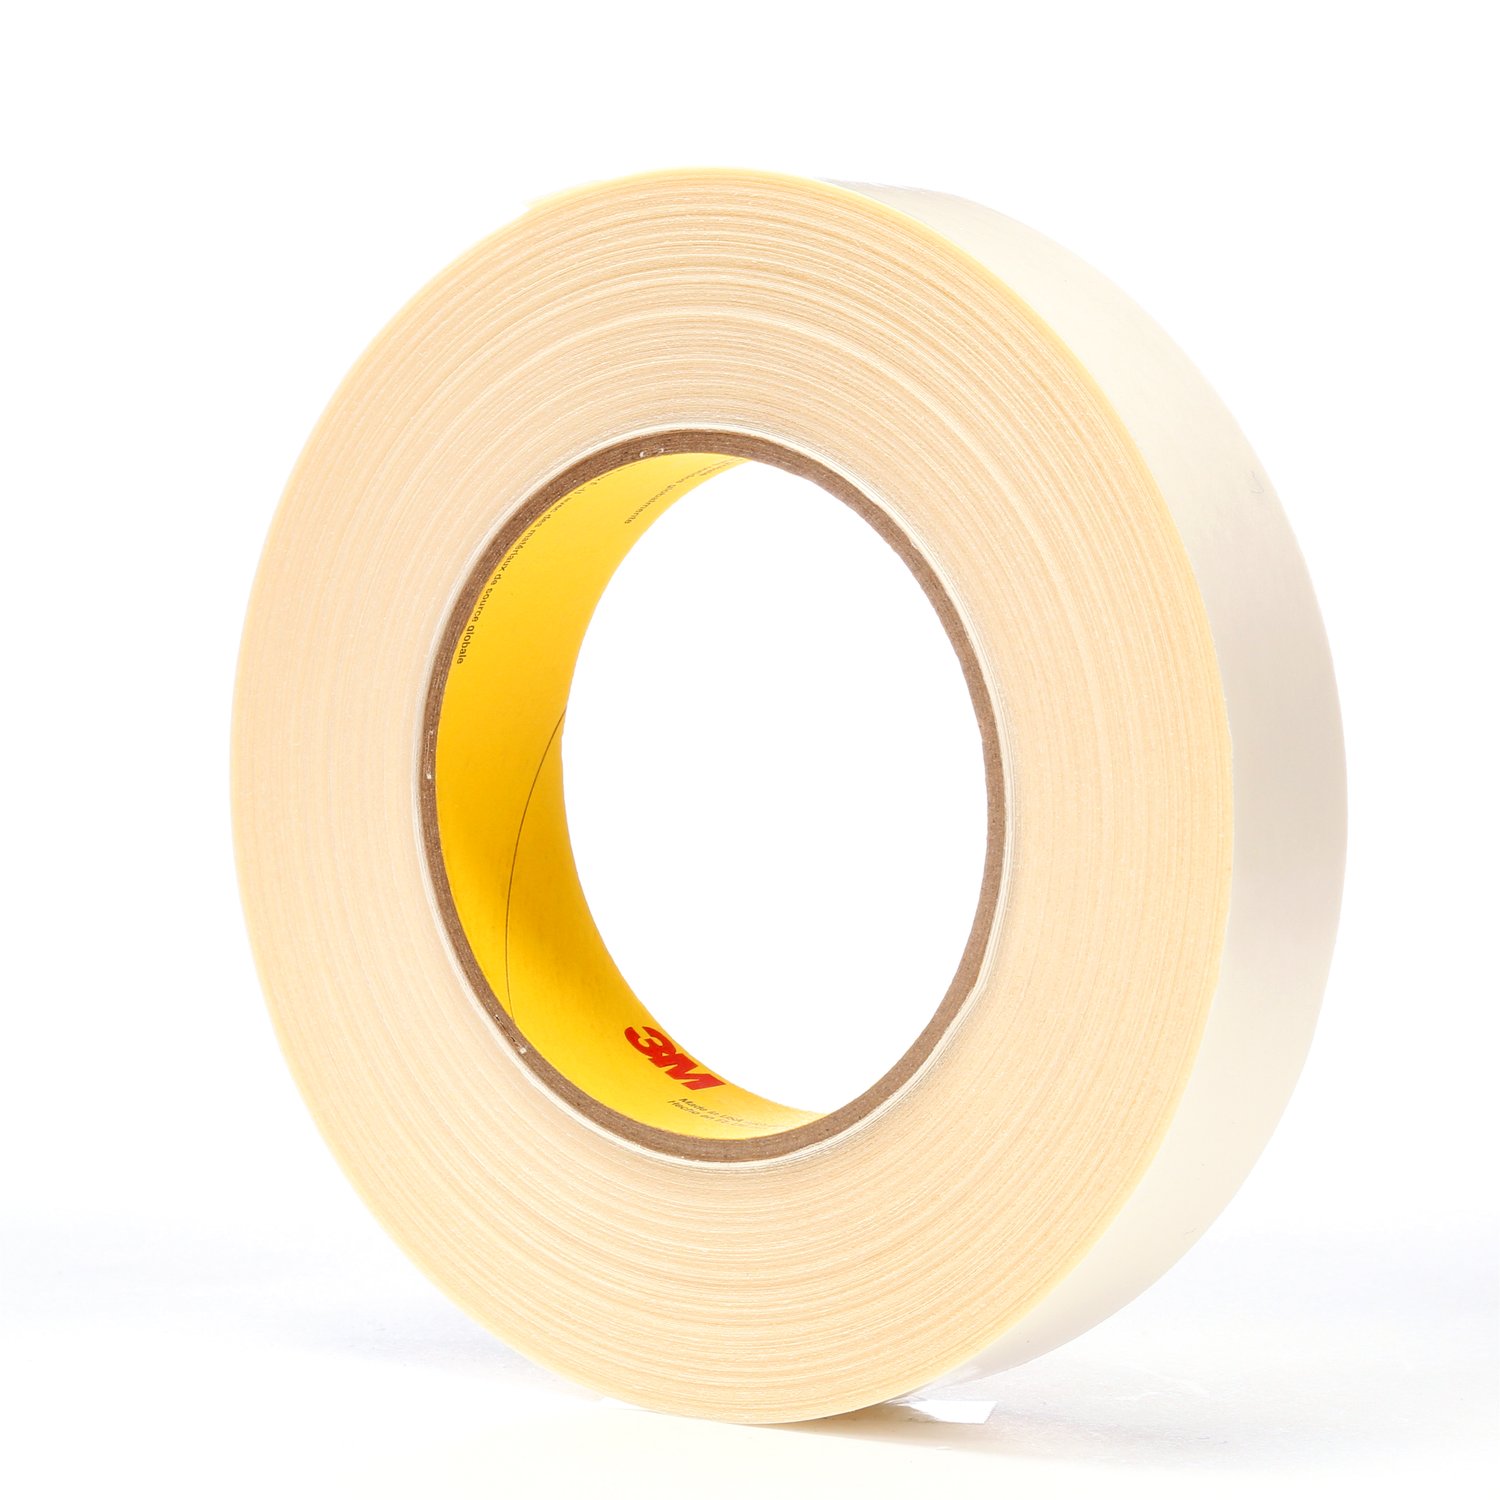 7000049279 - 3M Double Coated Tape 9740, Clear, 24 mm x 55 m, 3.5 mil, 48 rolls per
case